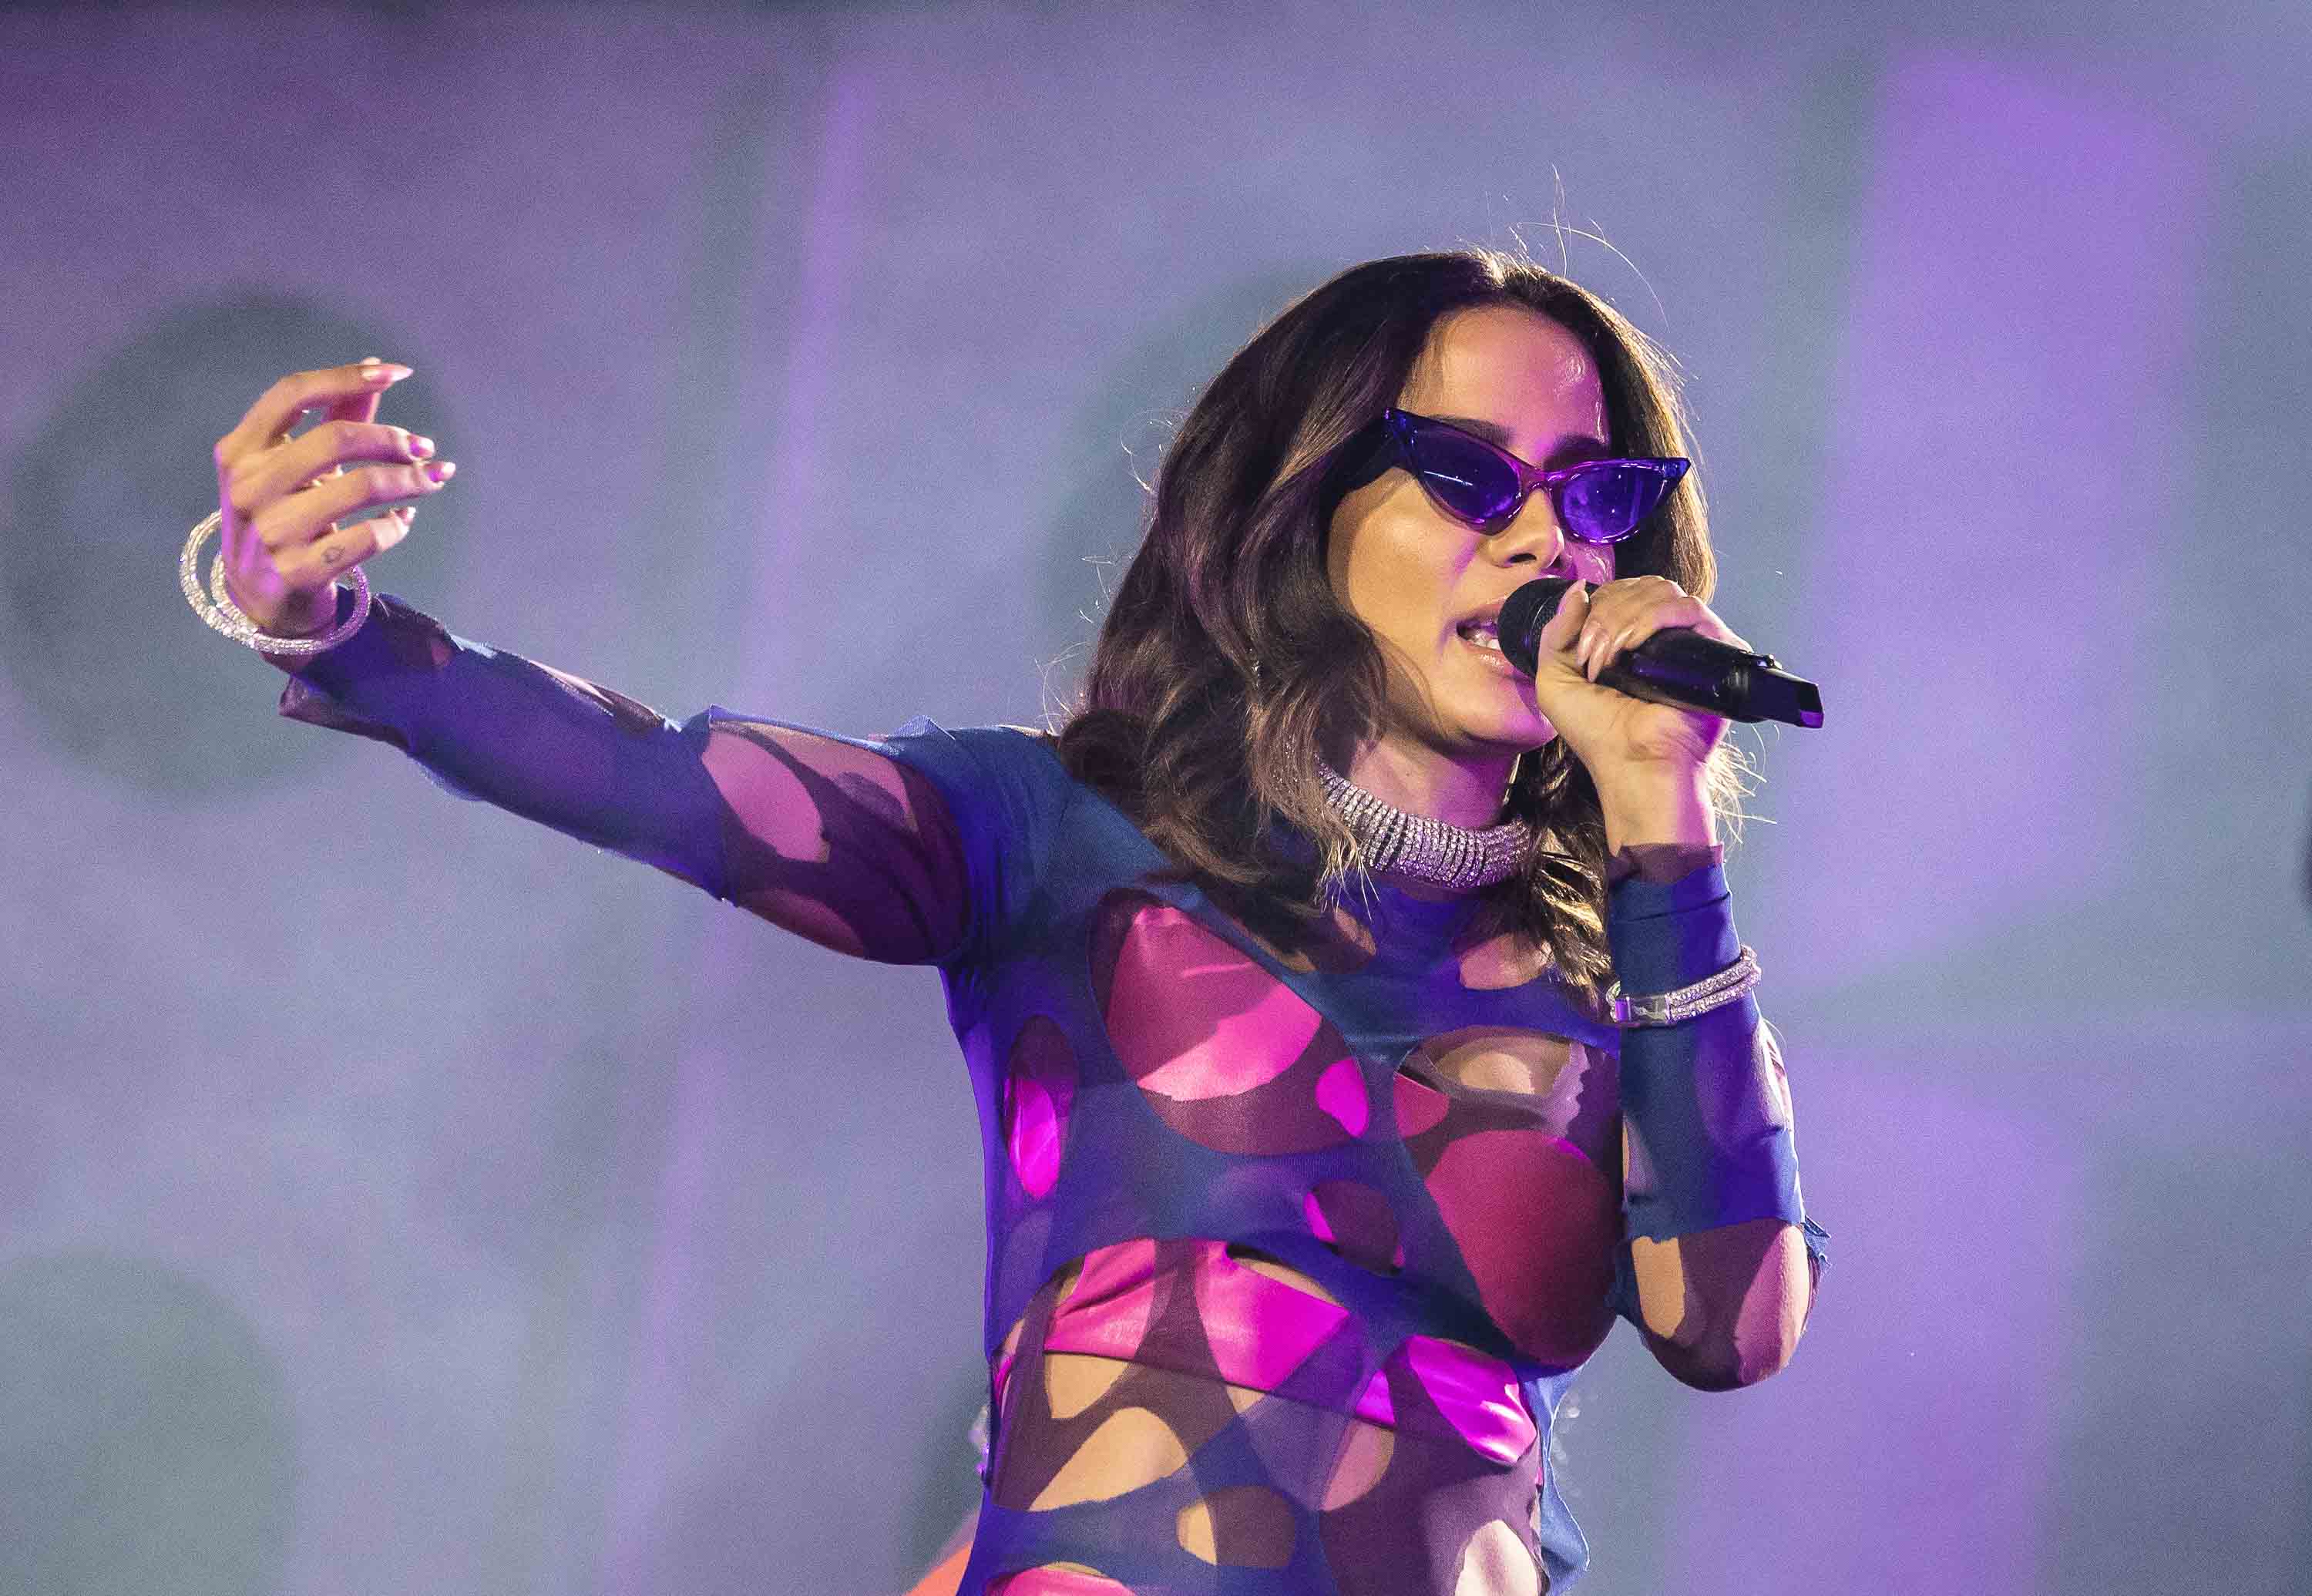 Anitta Singing on stage wearing purple and sunglasses